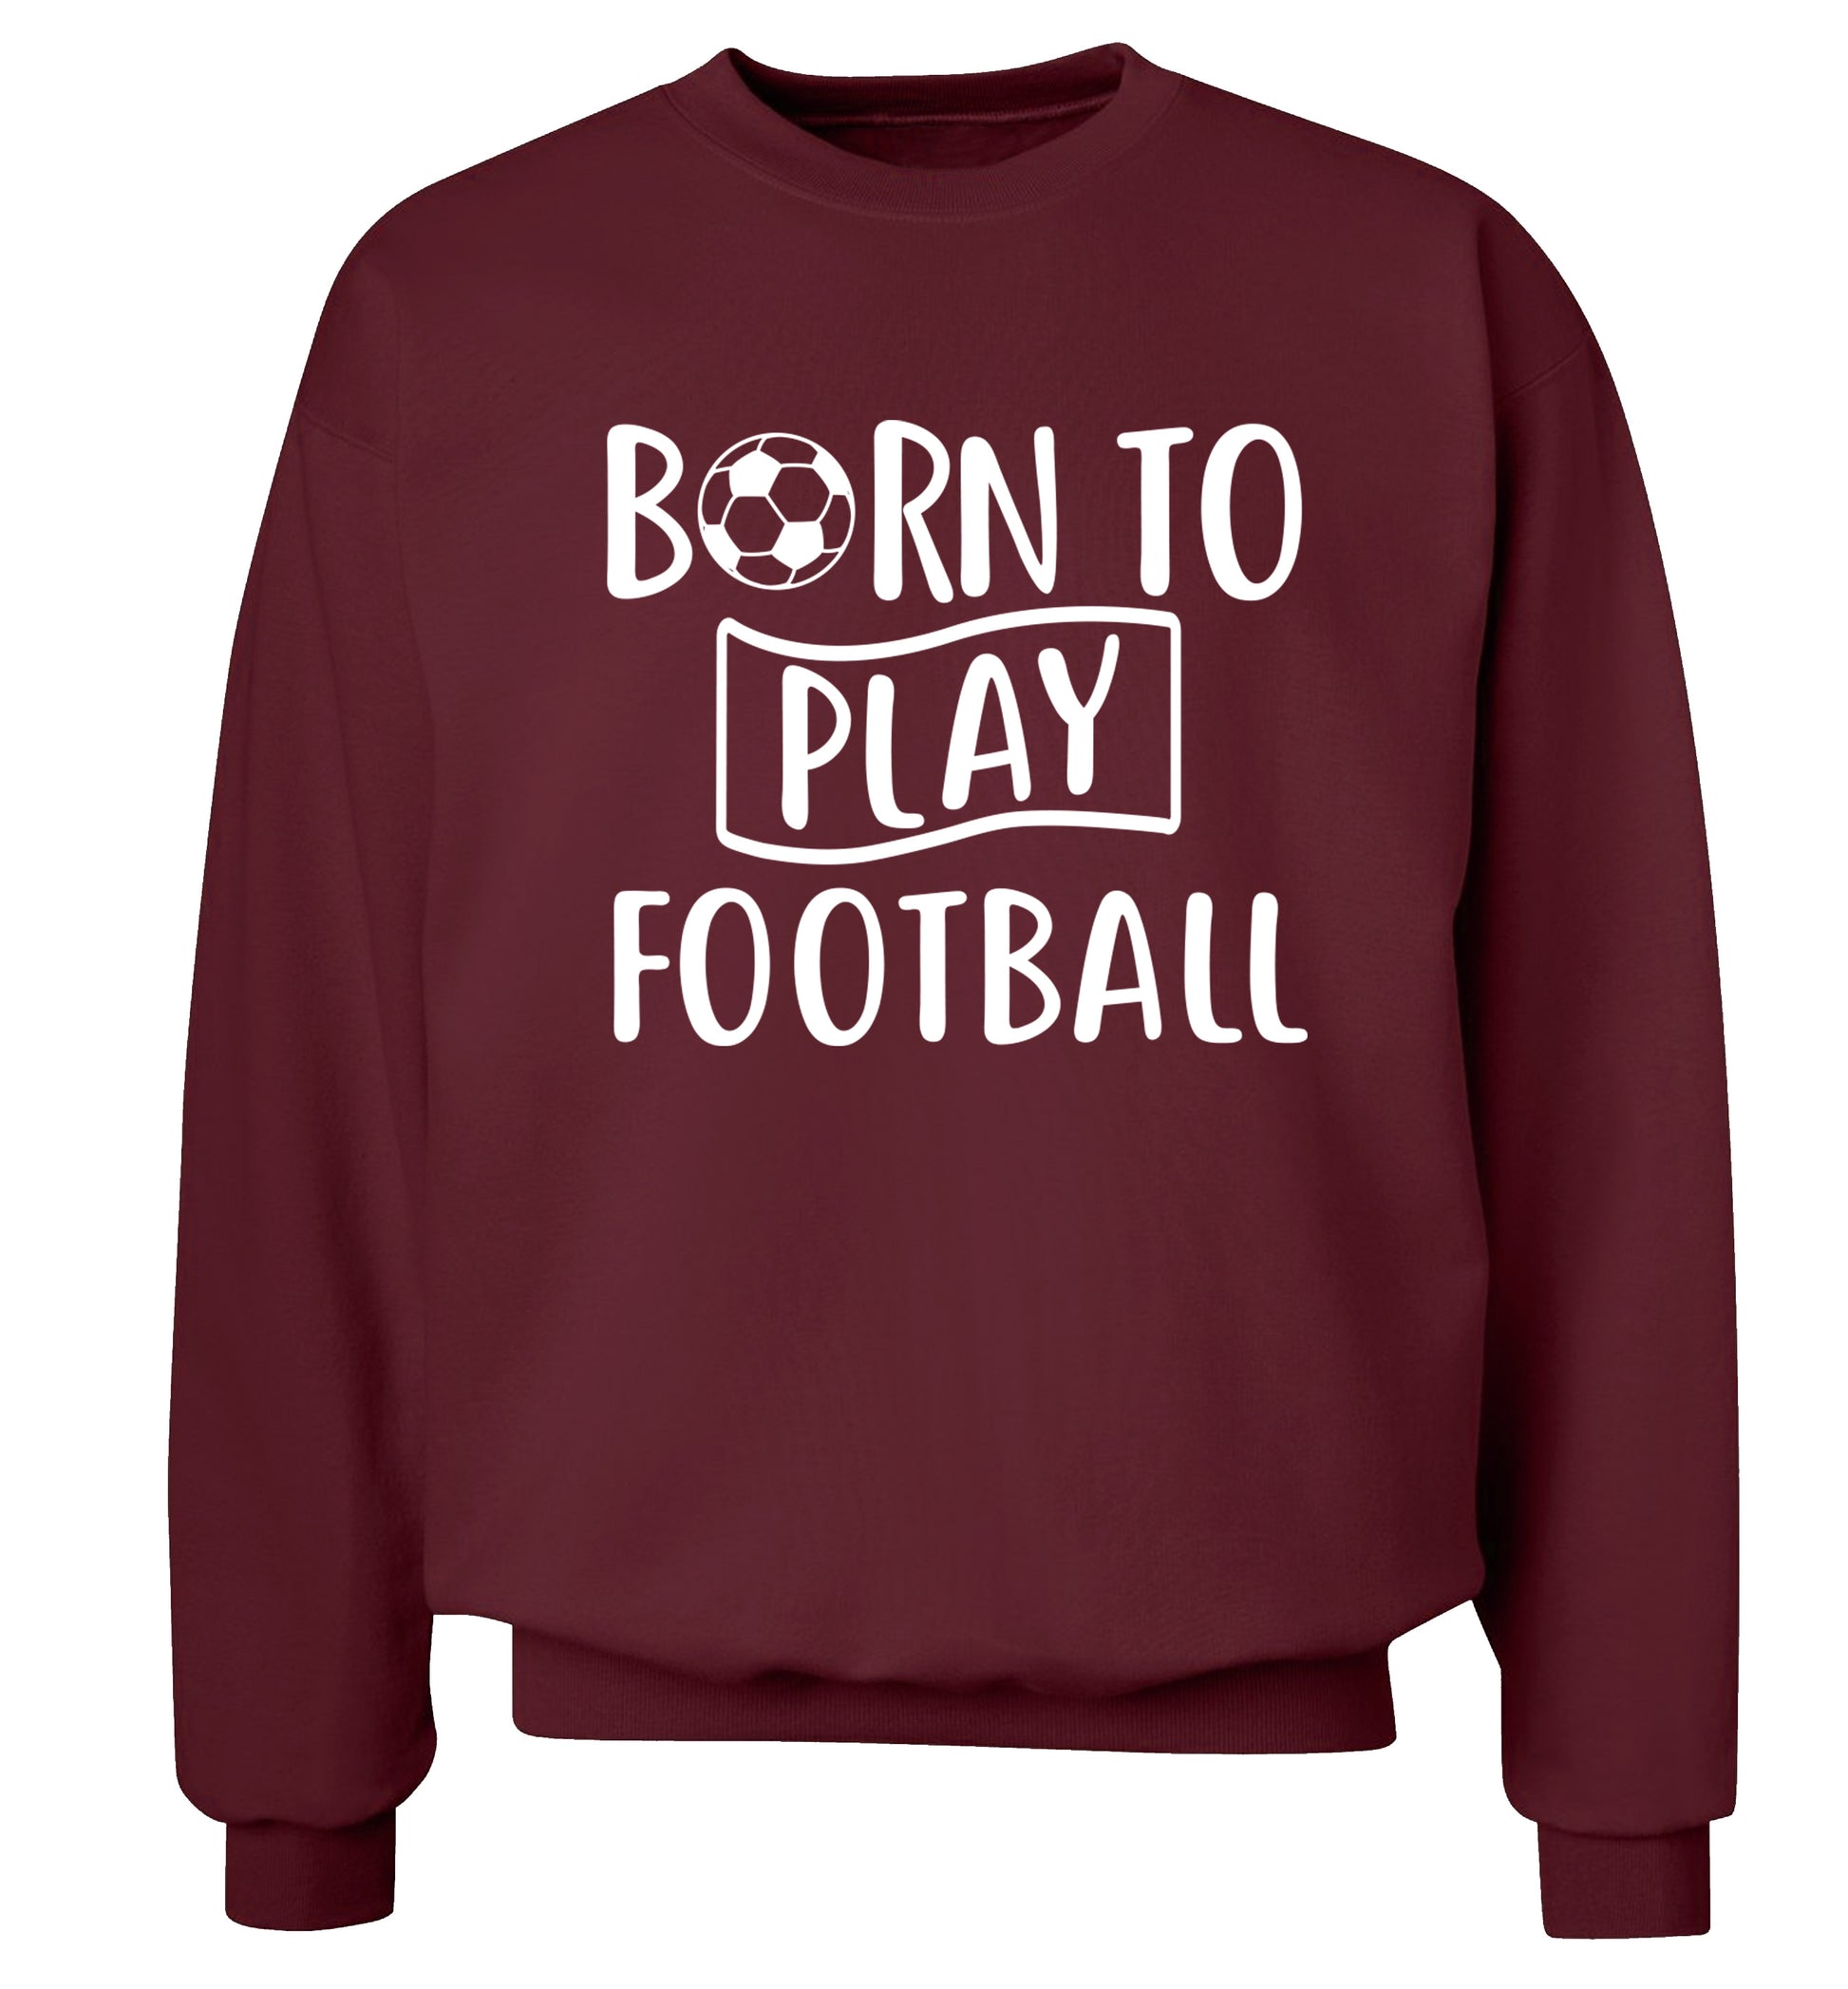 Born to play football Adult's unisexmaroon Sweater 2XL